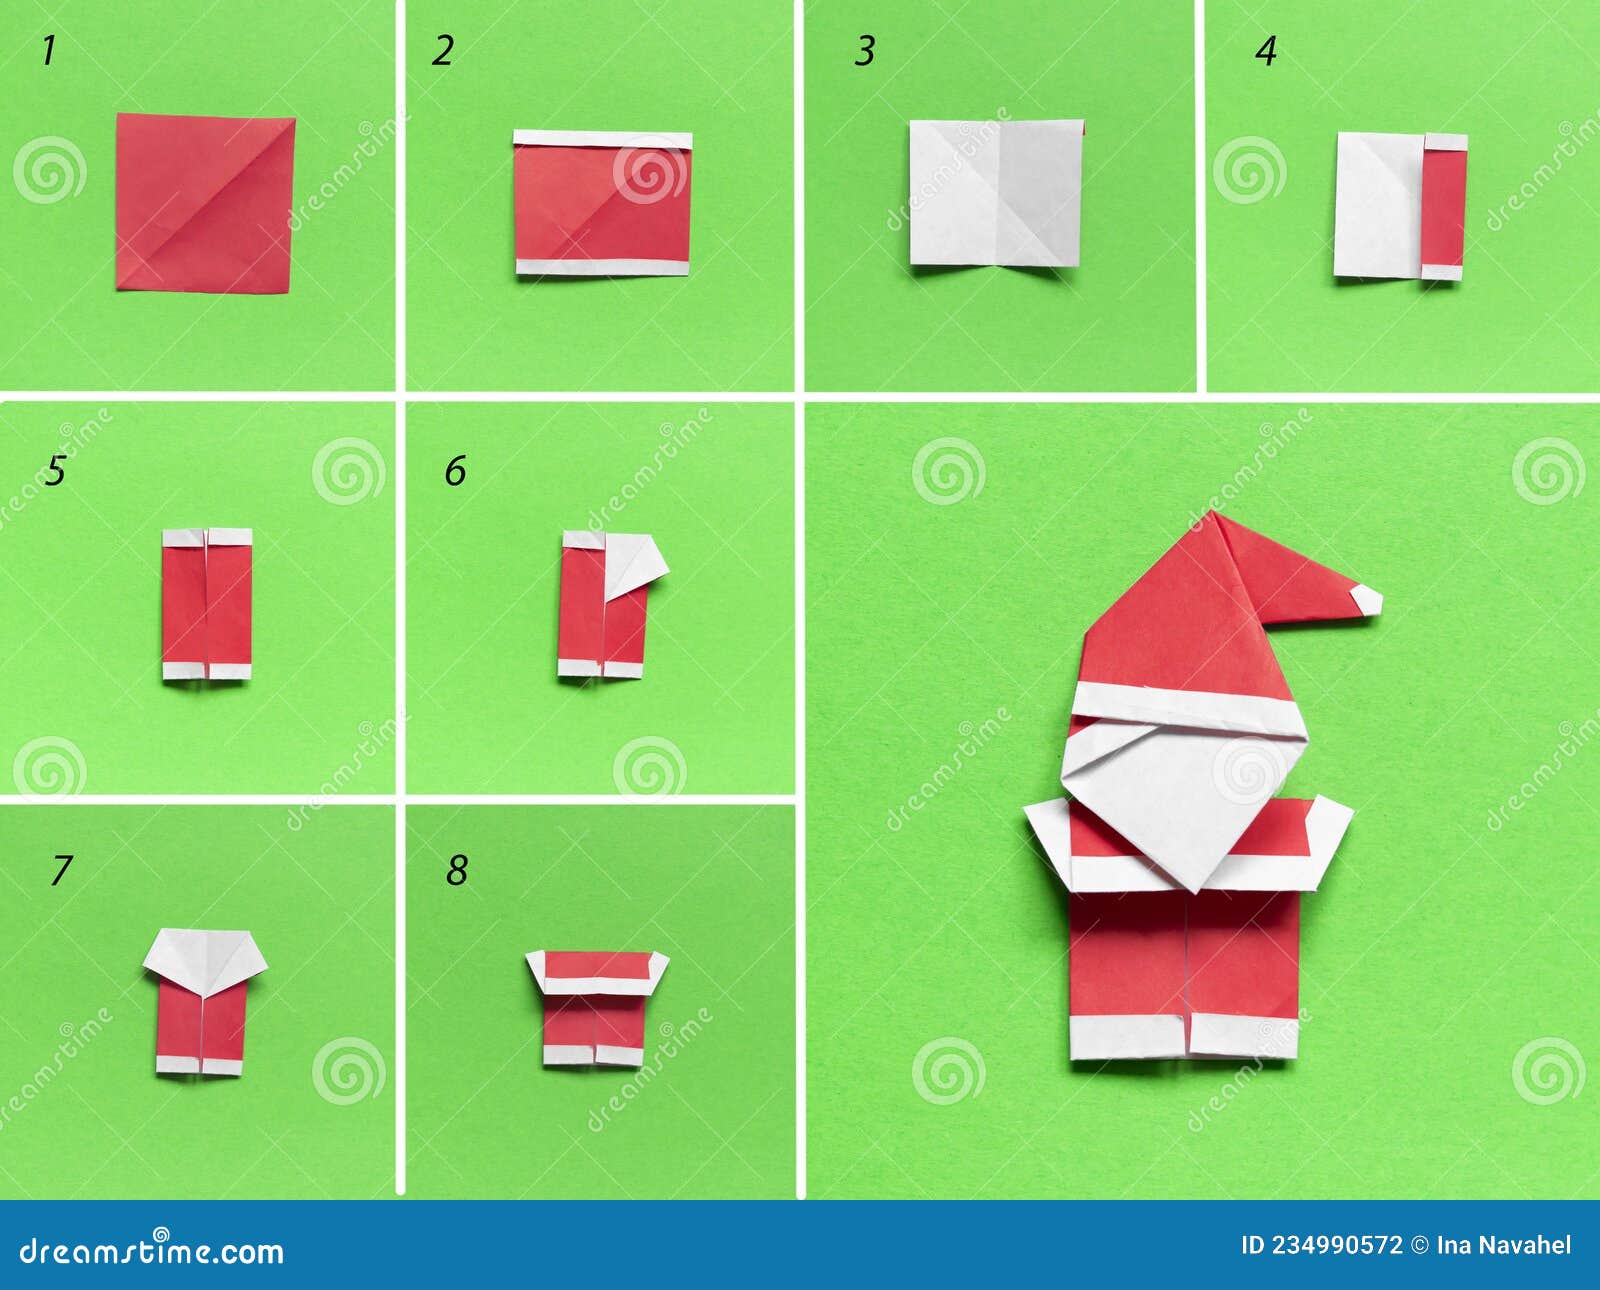 Step by Step Photo Instruction How To Make Origami Paper Santa Pants. Simple  Diy Kids Children S Concept Stock Photo - Image of learn, flatlay: 234990572